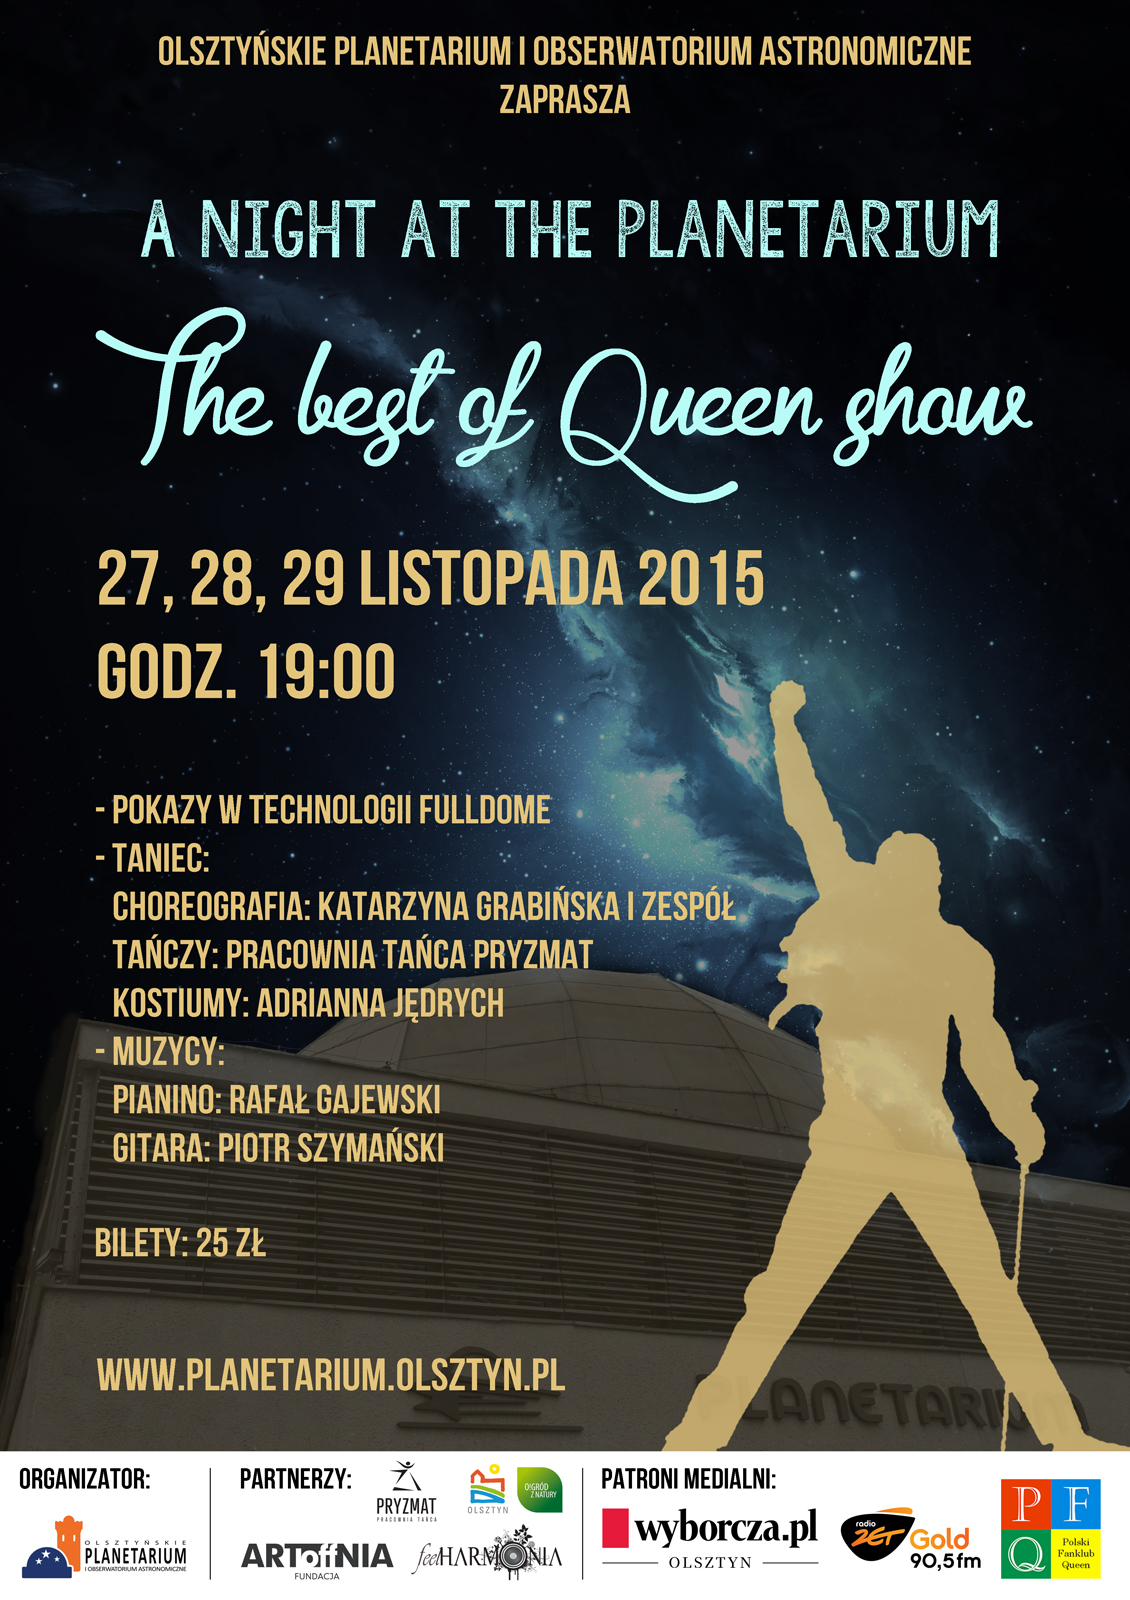 The best of Queen show - A night at the Planetarium